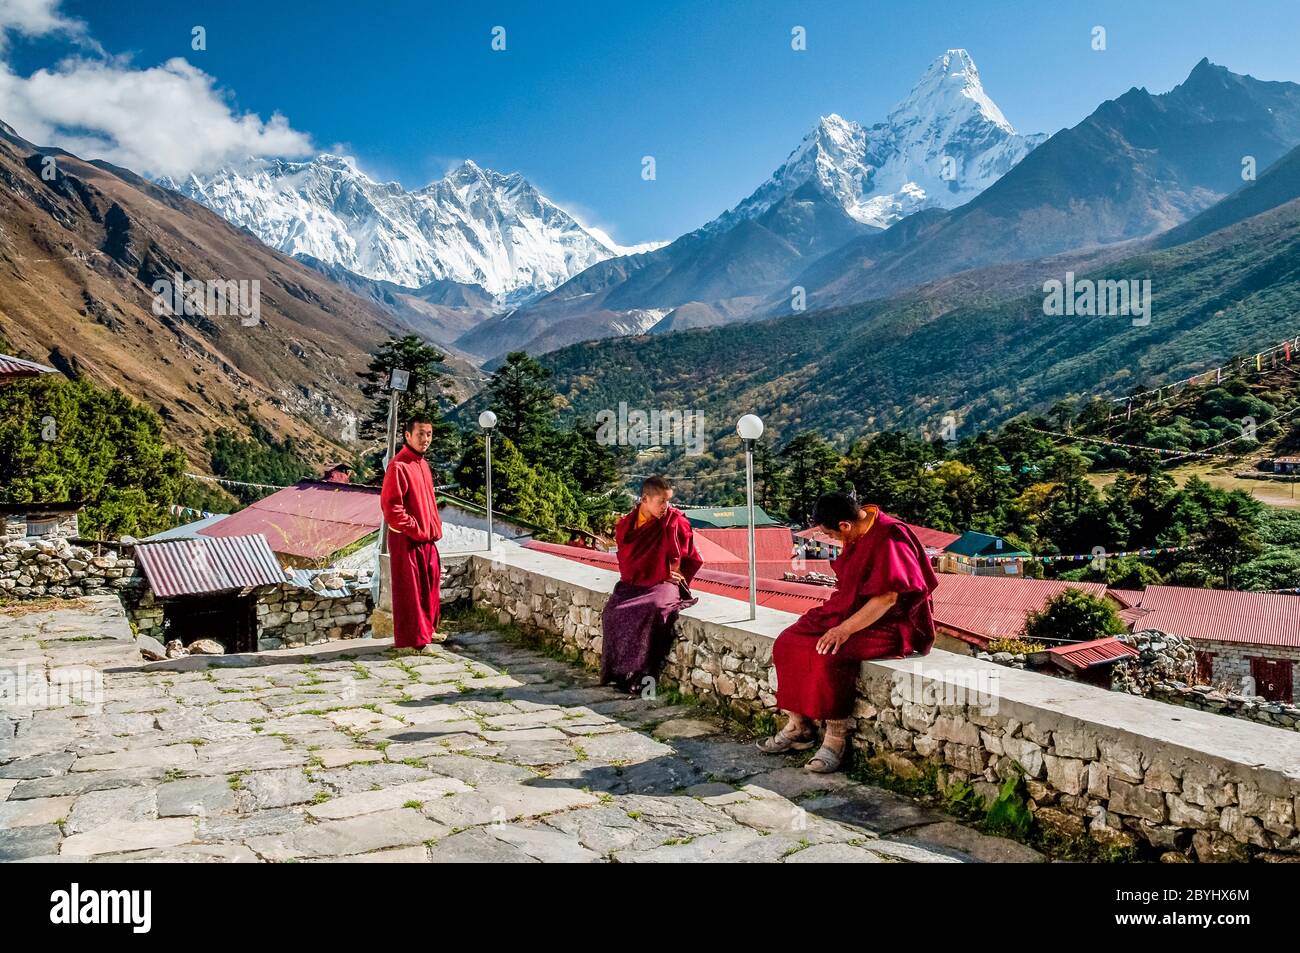 Nepal. Trek to Island Peak. Colourful scenes in and around the Thyangboche Buddhist Monastery as Buddhist Monks take a break. With the mountain of Ama Dablam and Mount Everest to the left in the distance Stock Photo